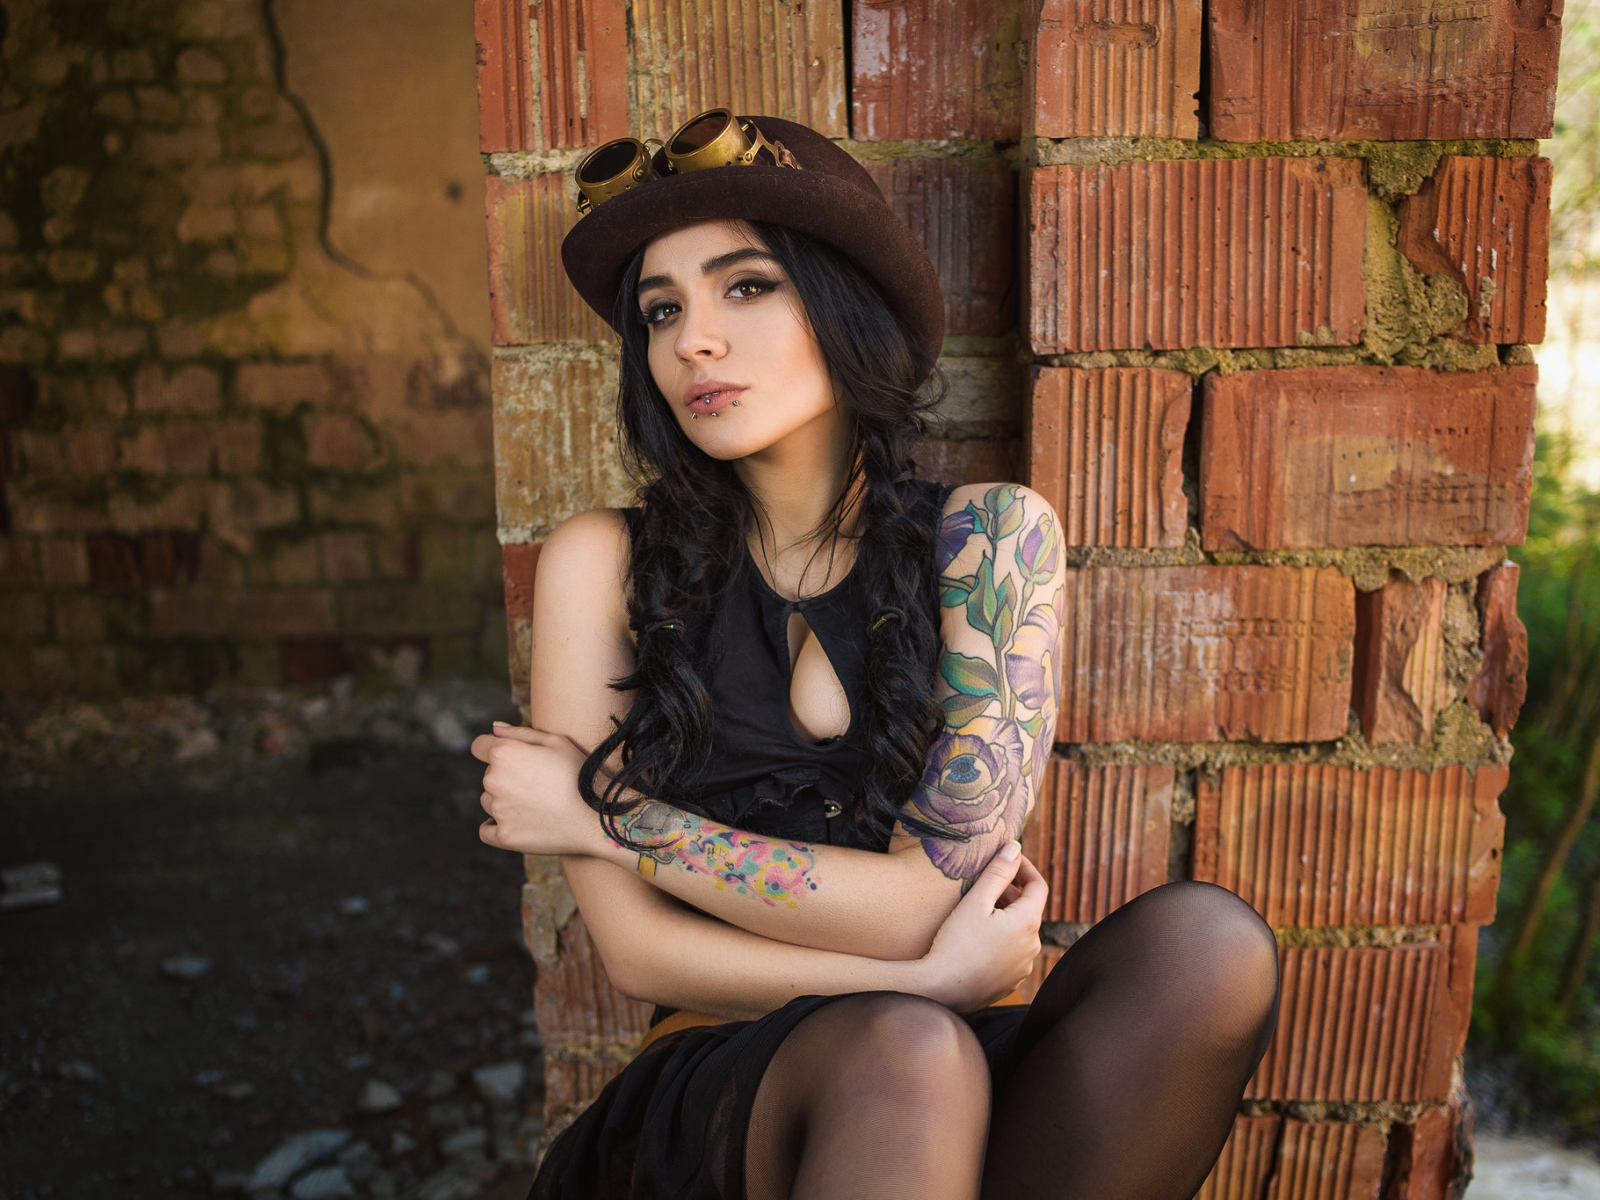 The girl in a hat with tattoos on his arm sits near the wall